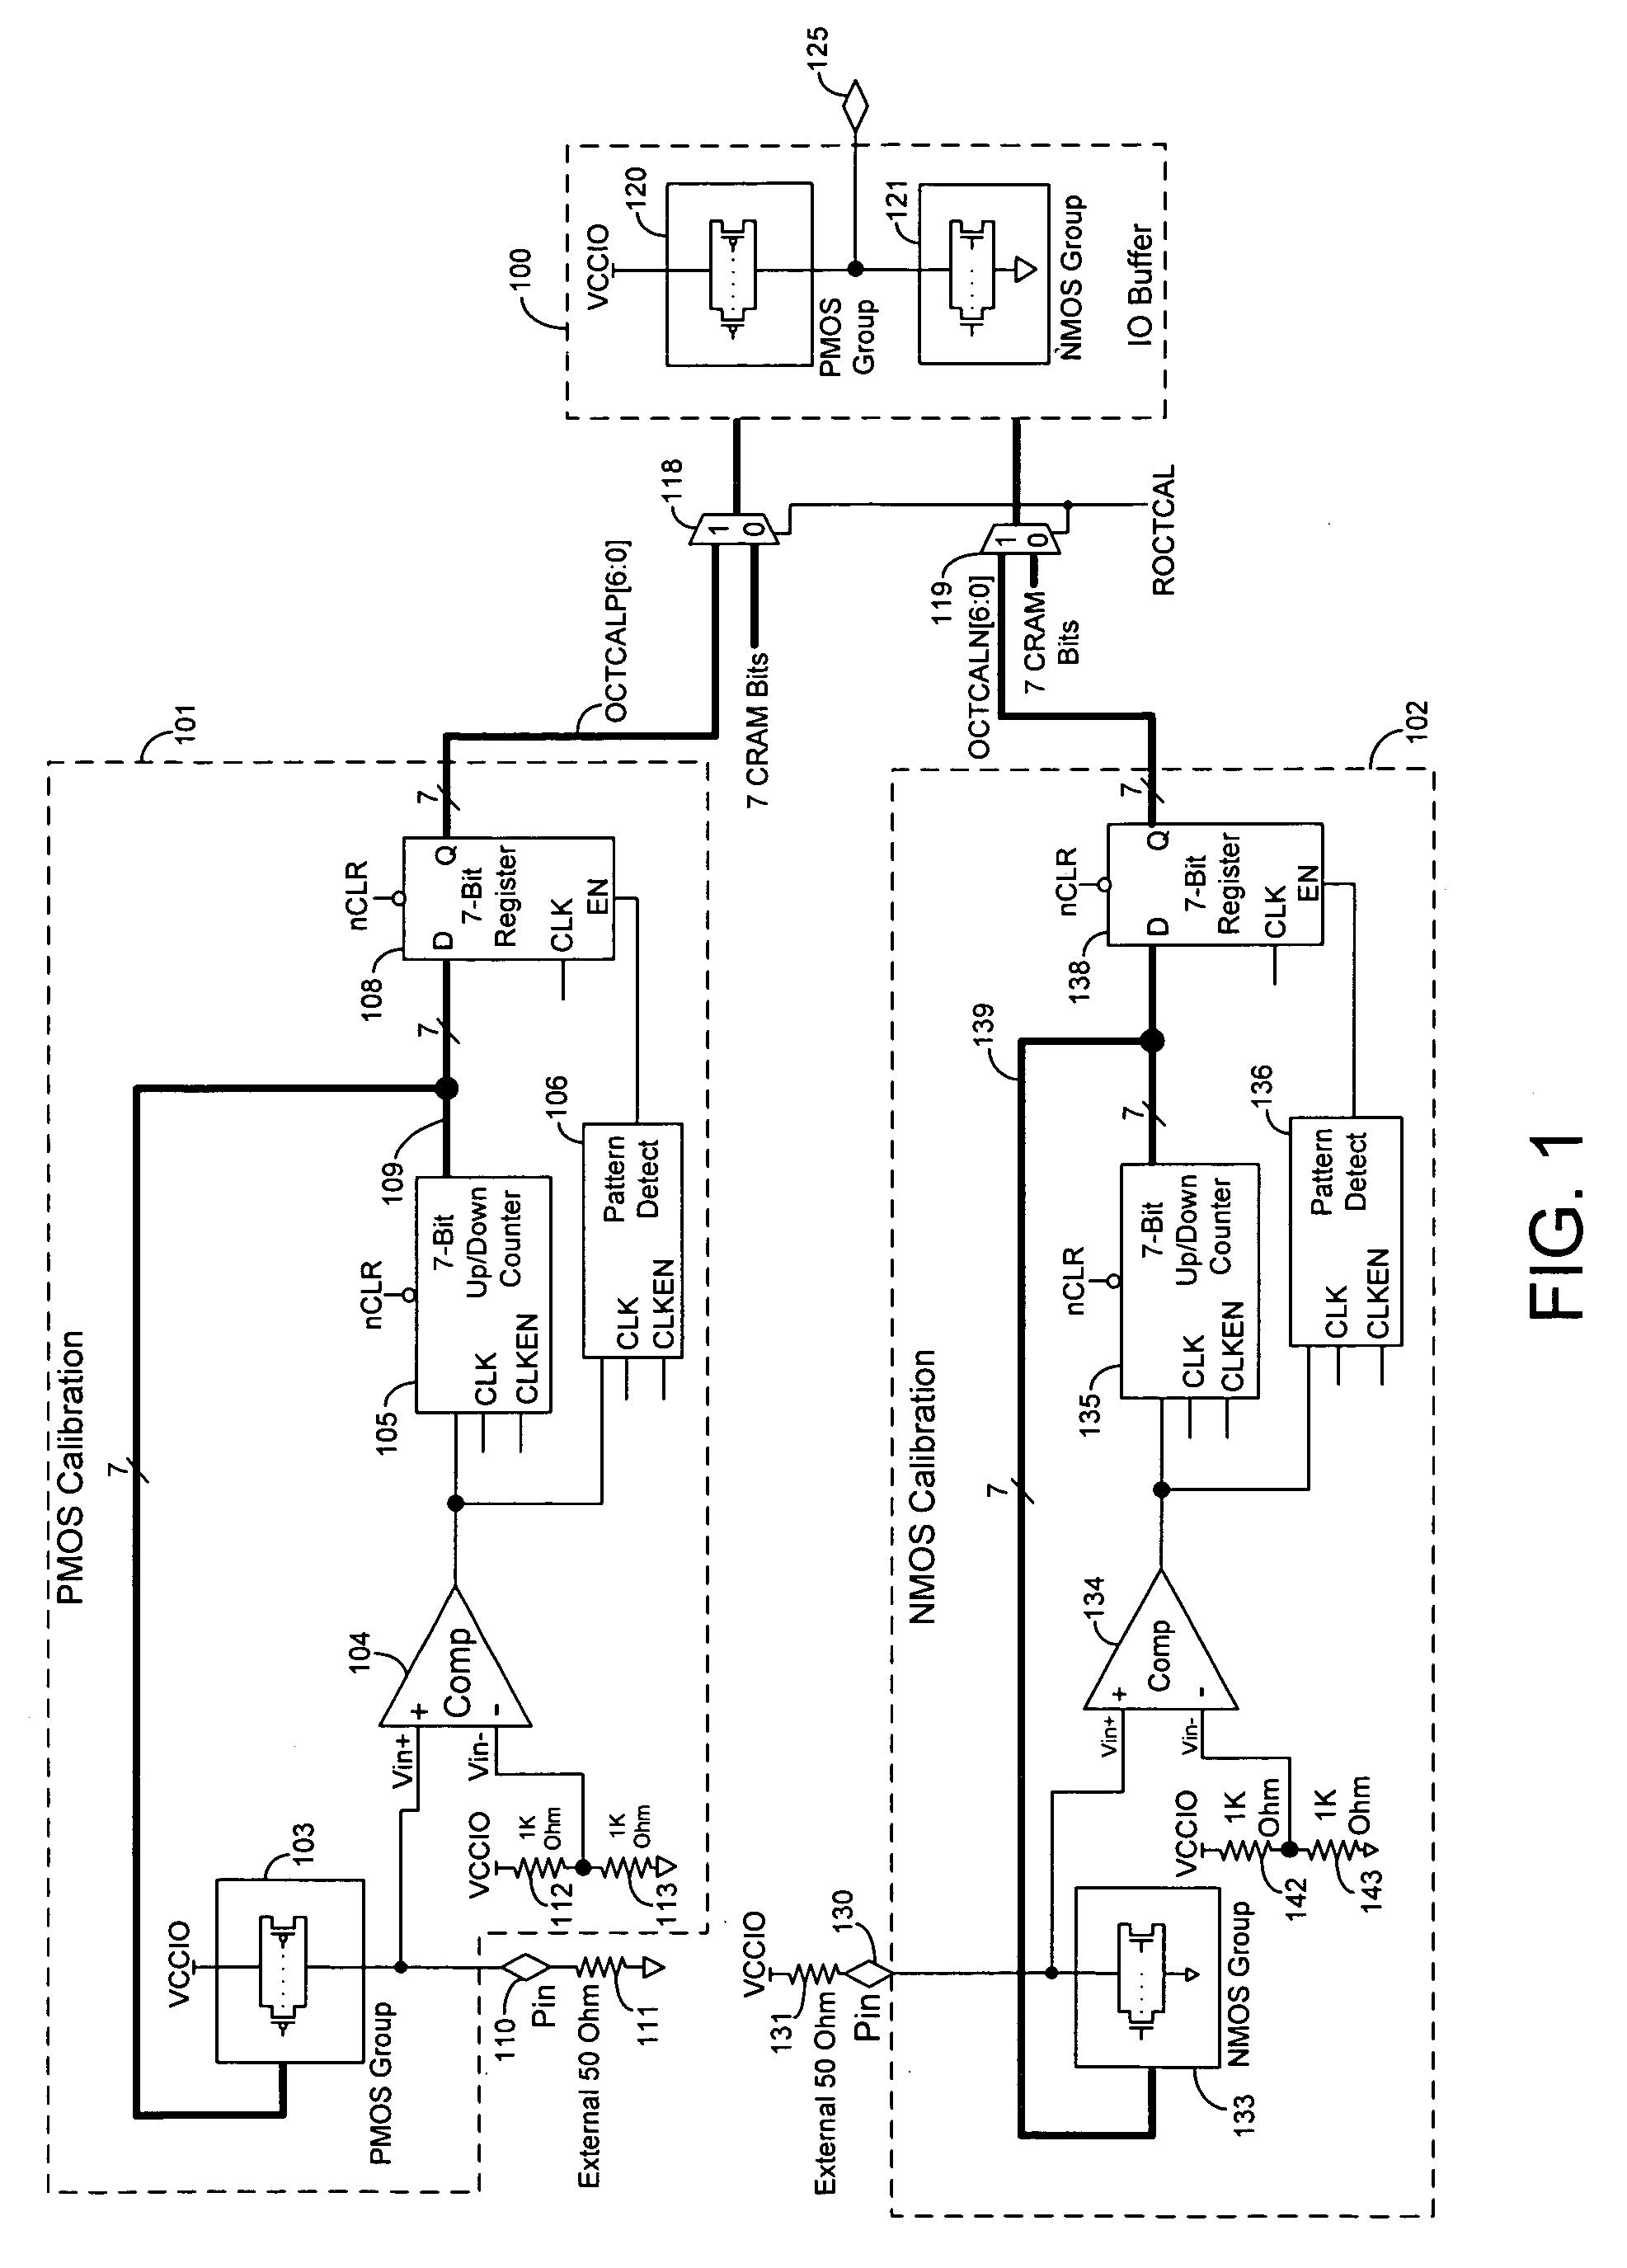 On-chip termination with calibrated driver strength